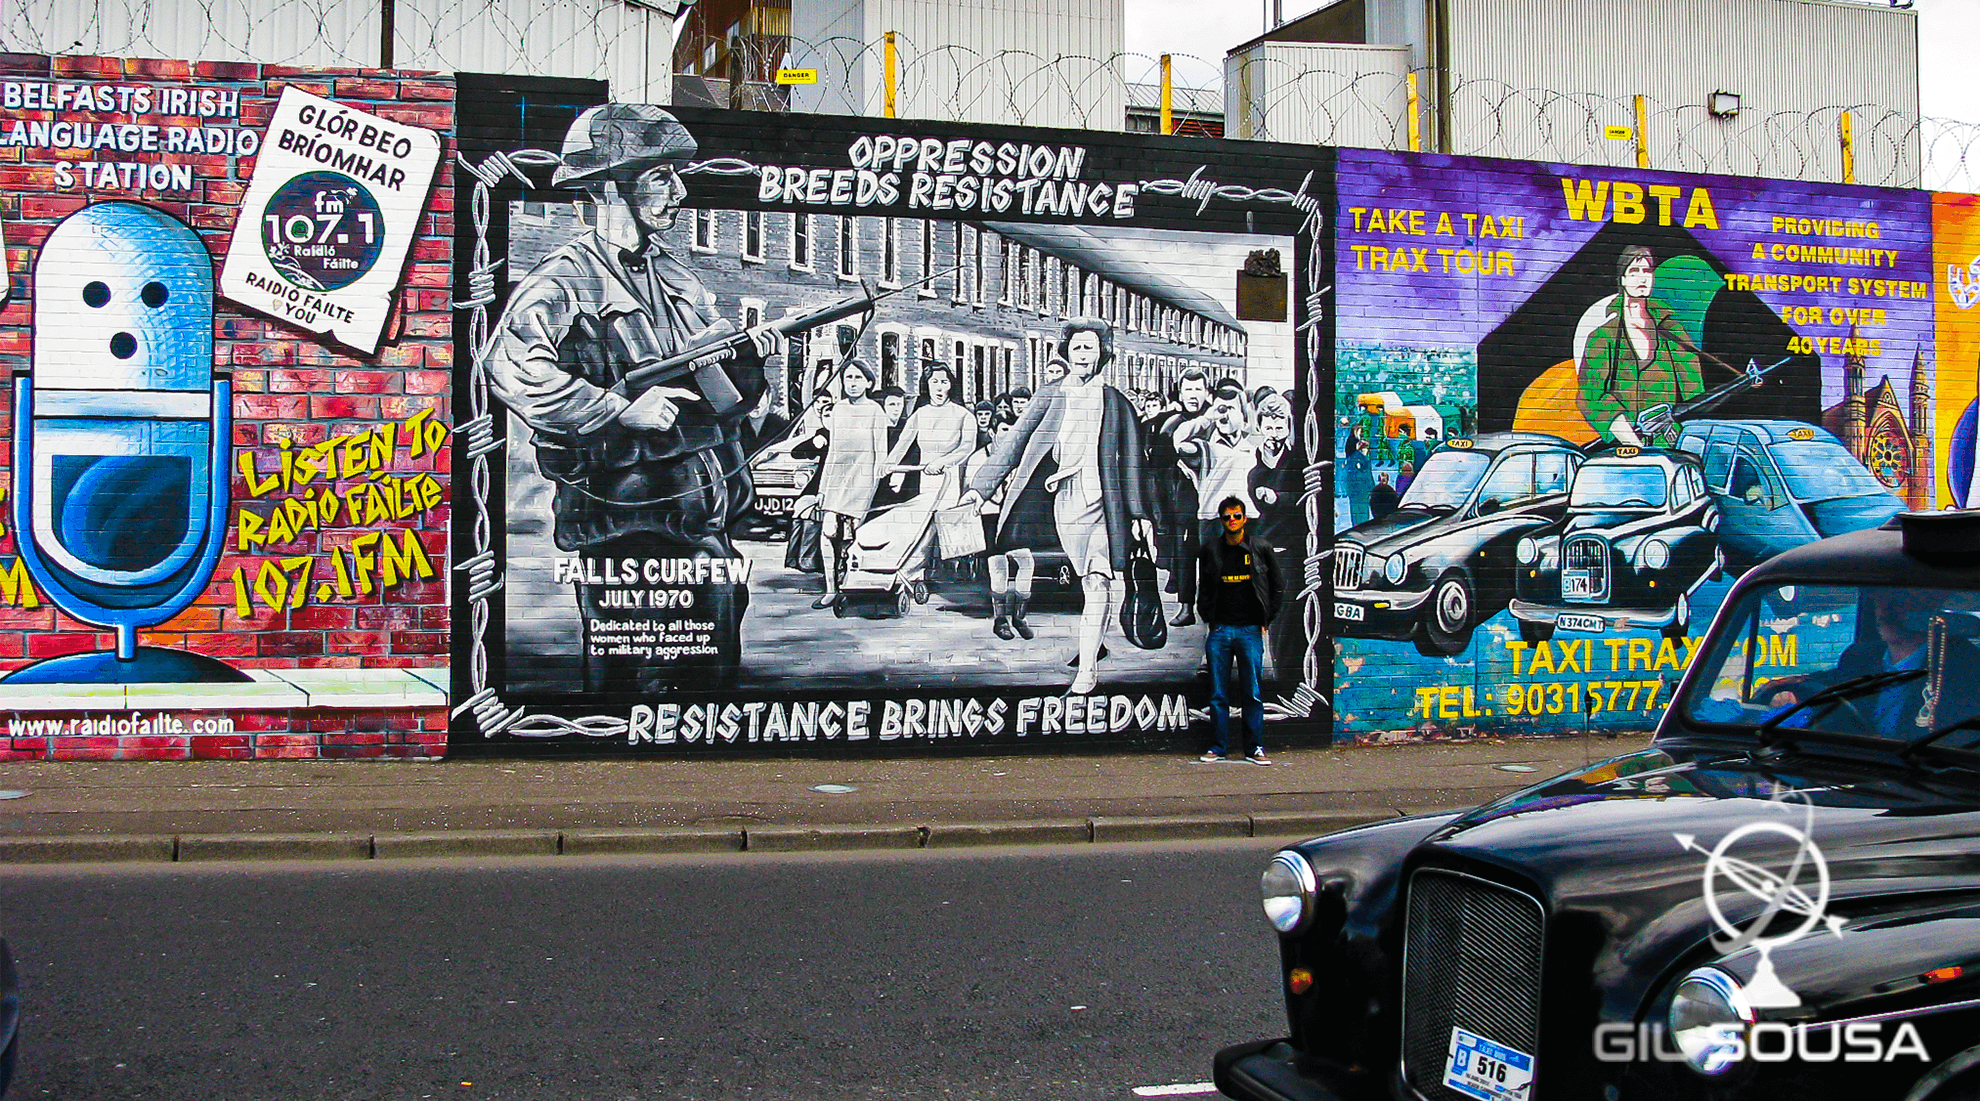 Back taxi next to one of the Peace Wall's section in Belfast